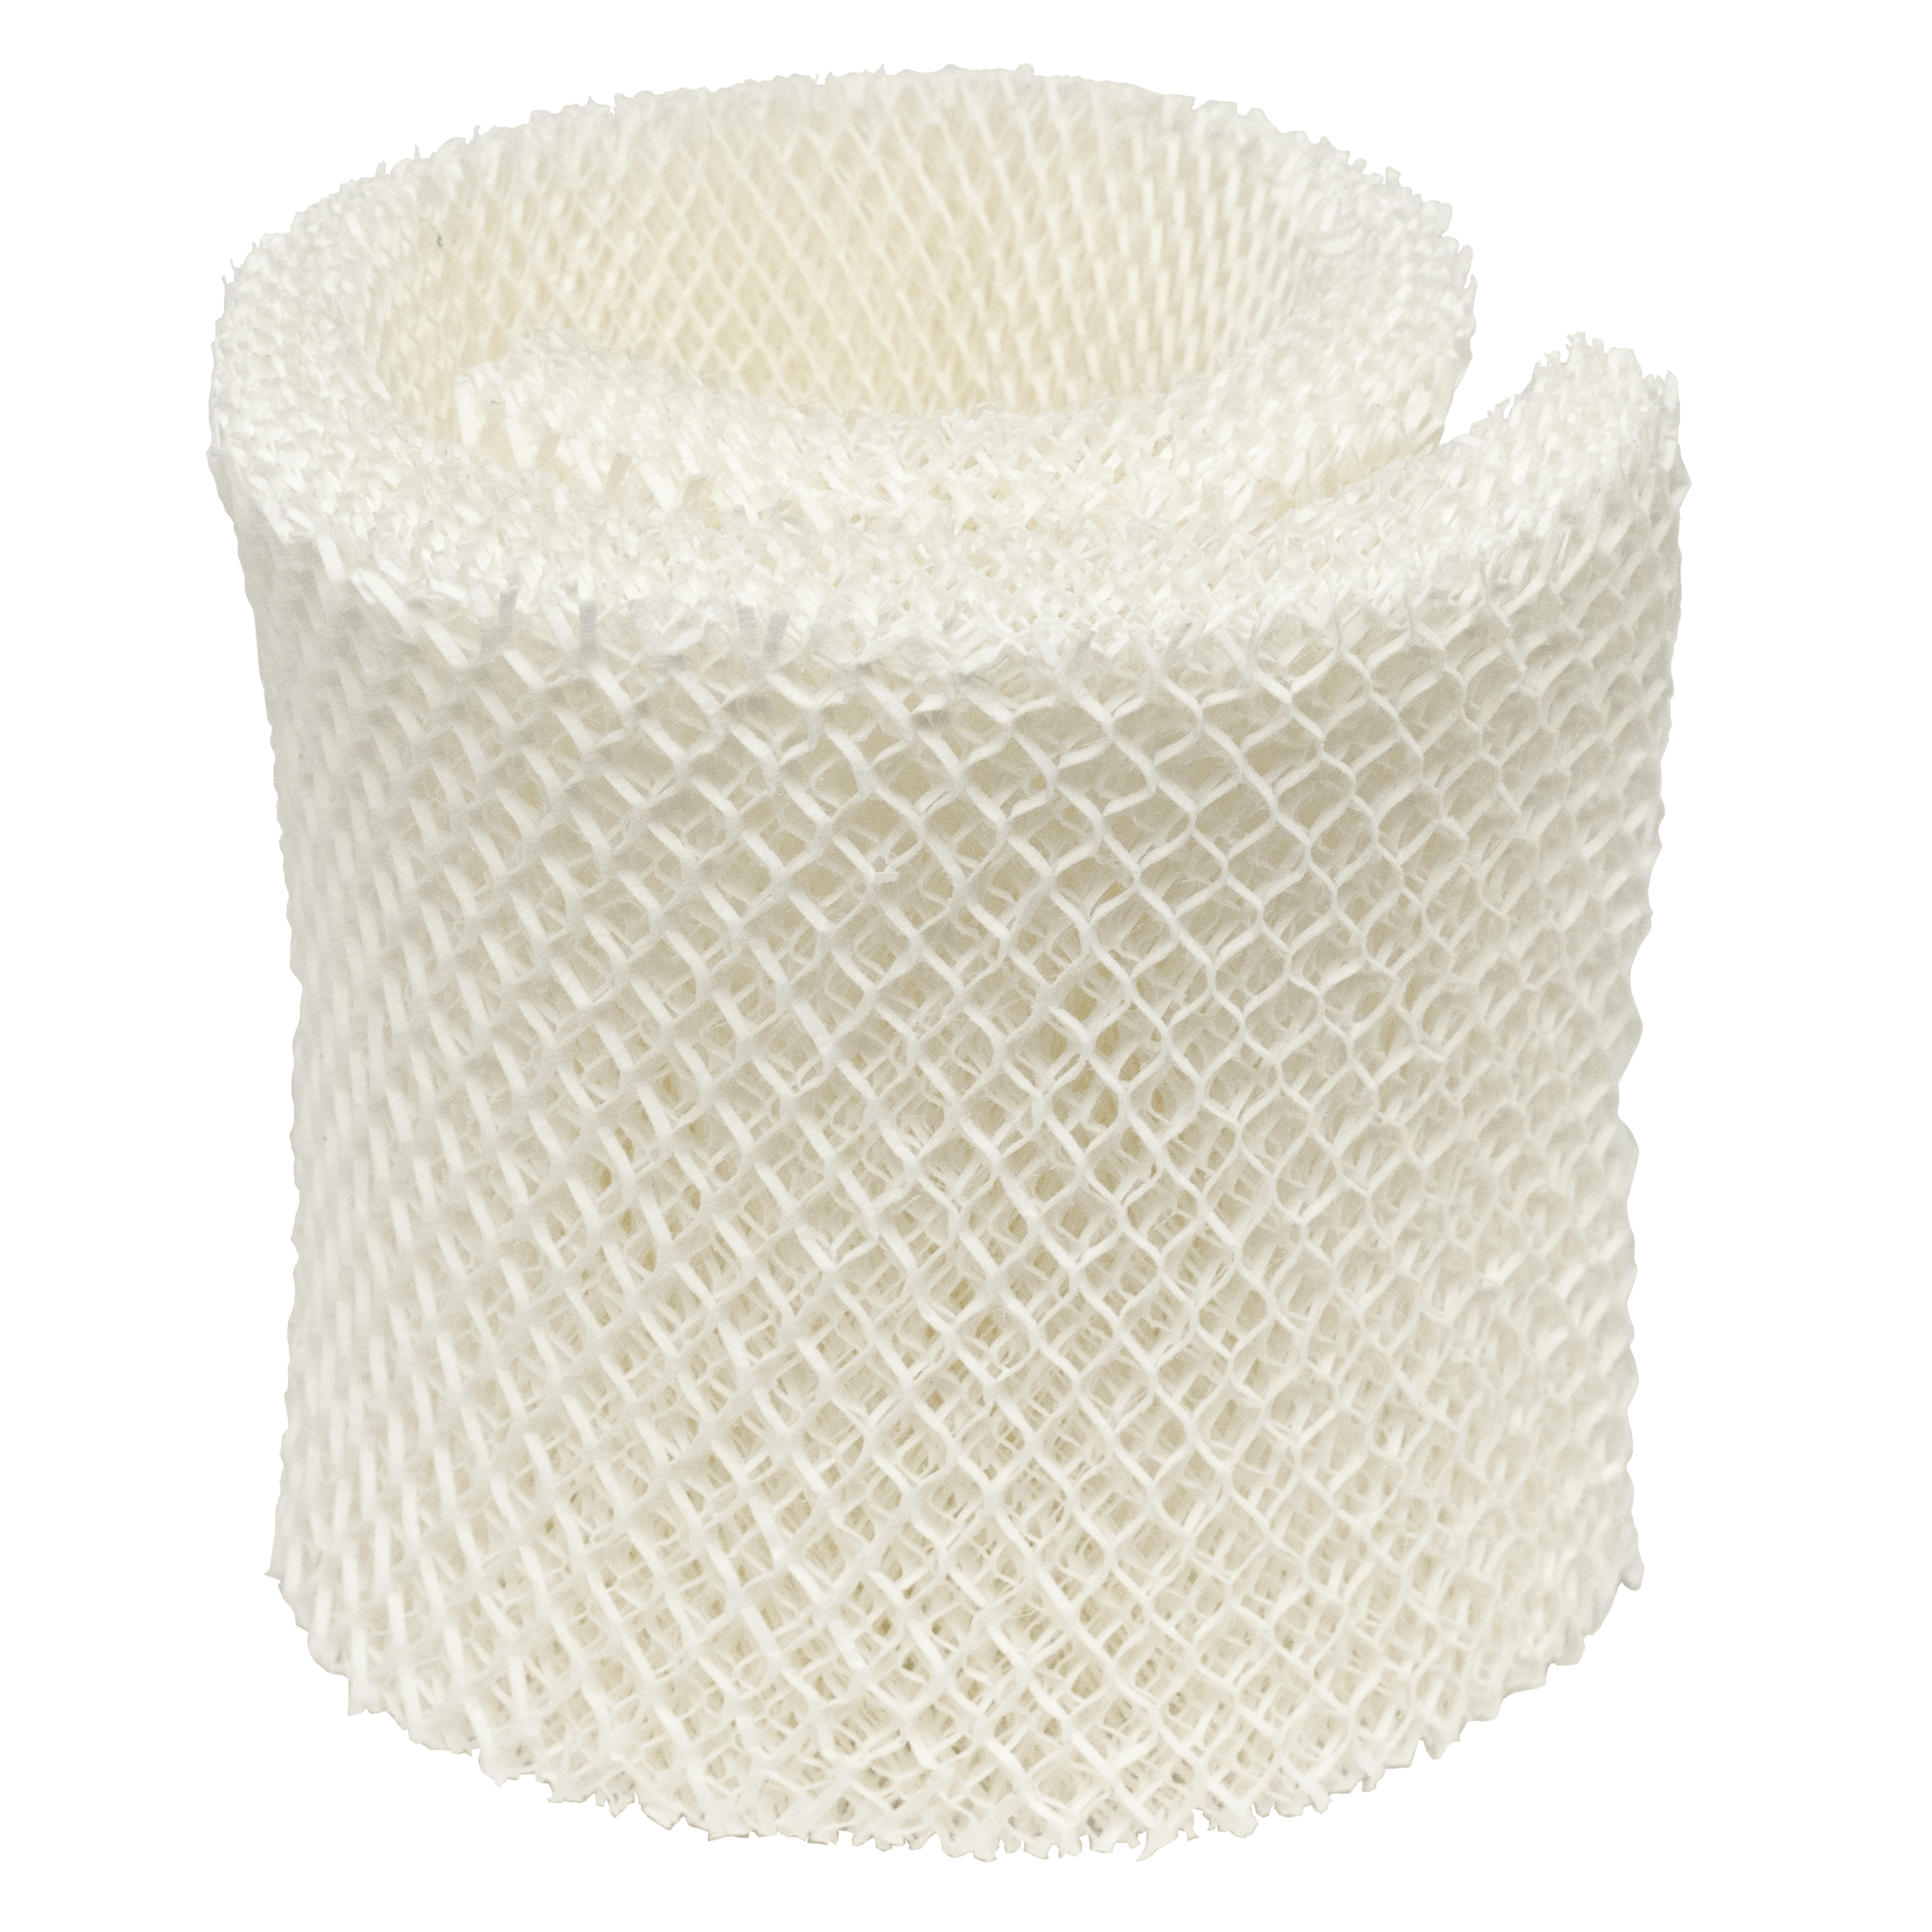 Kenmore 15508 Replacement Filter for Humidifier